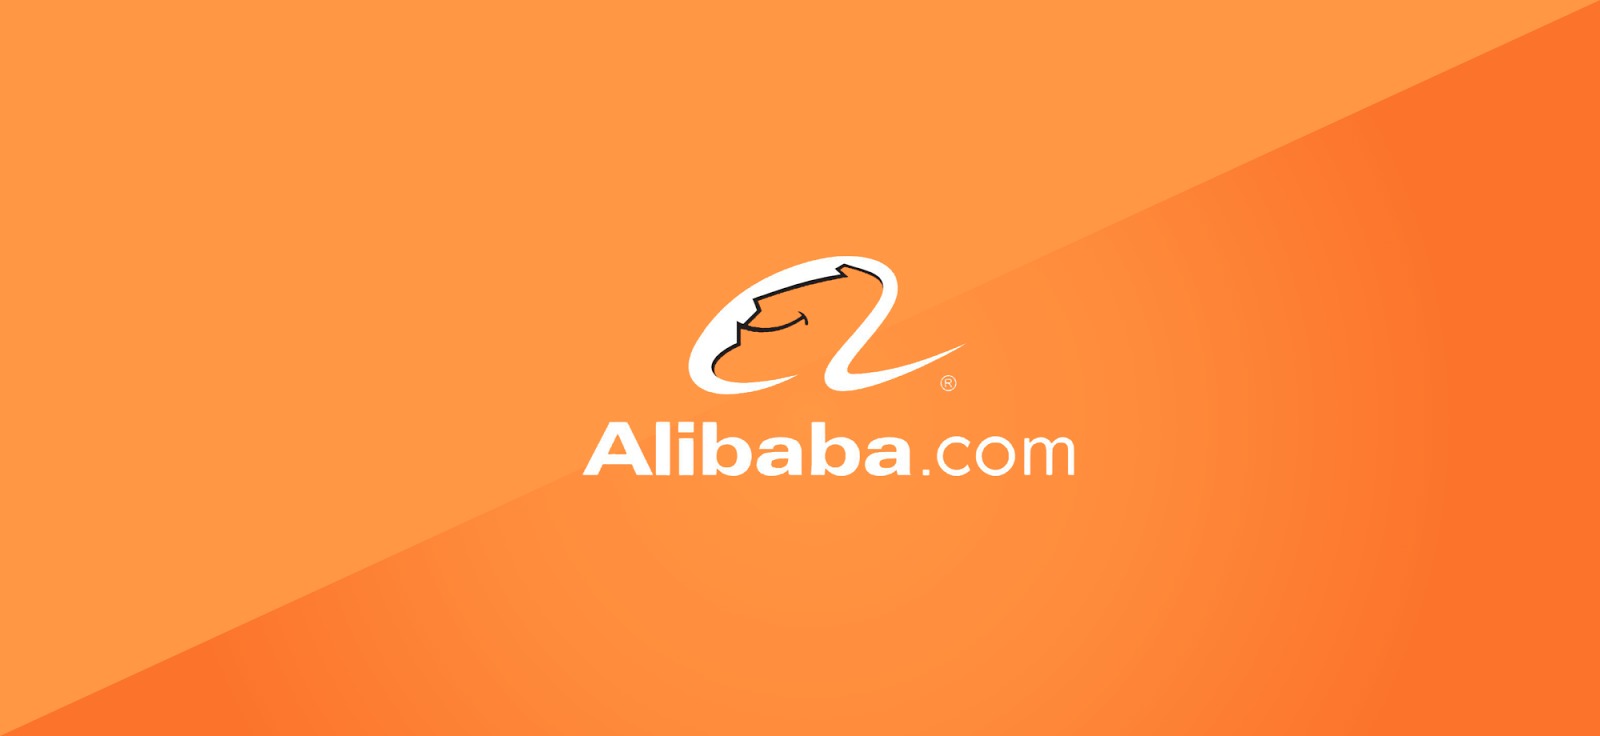 15-facts-about-alibaba-com